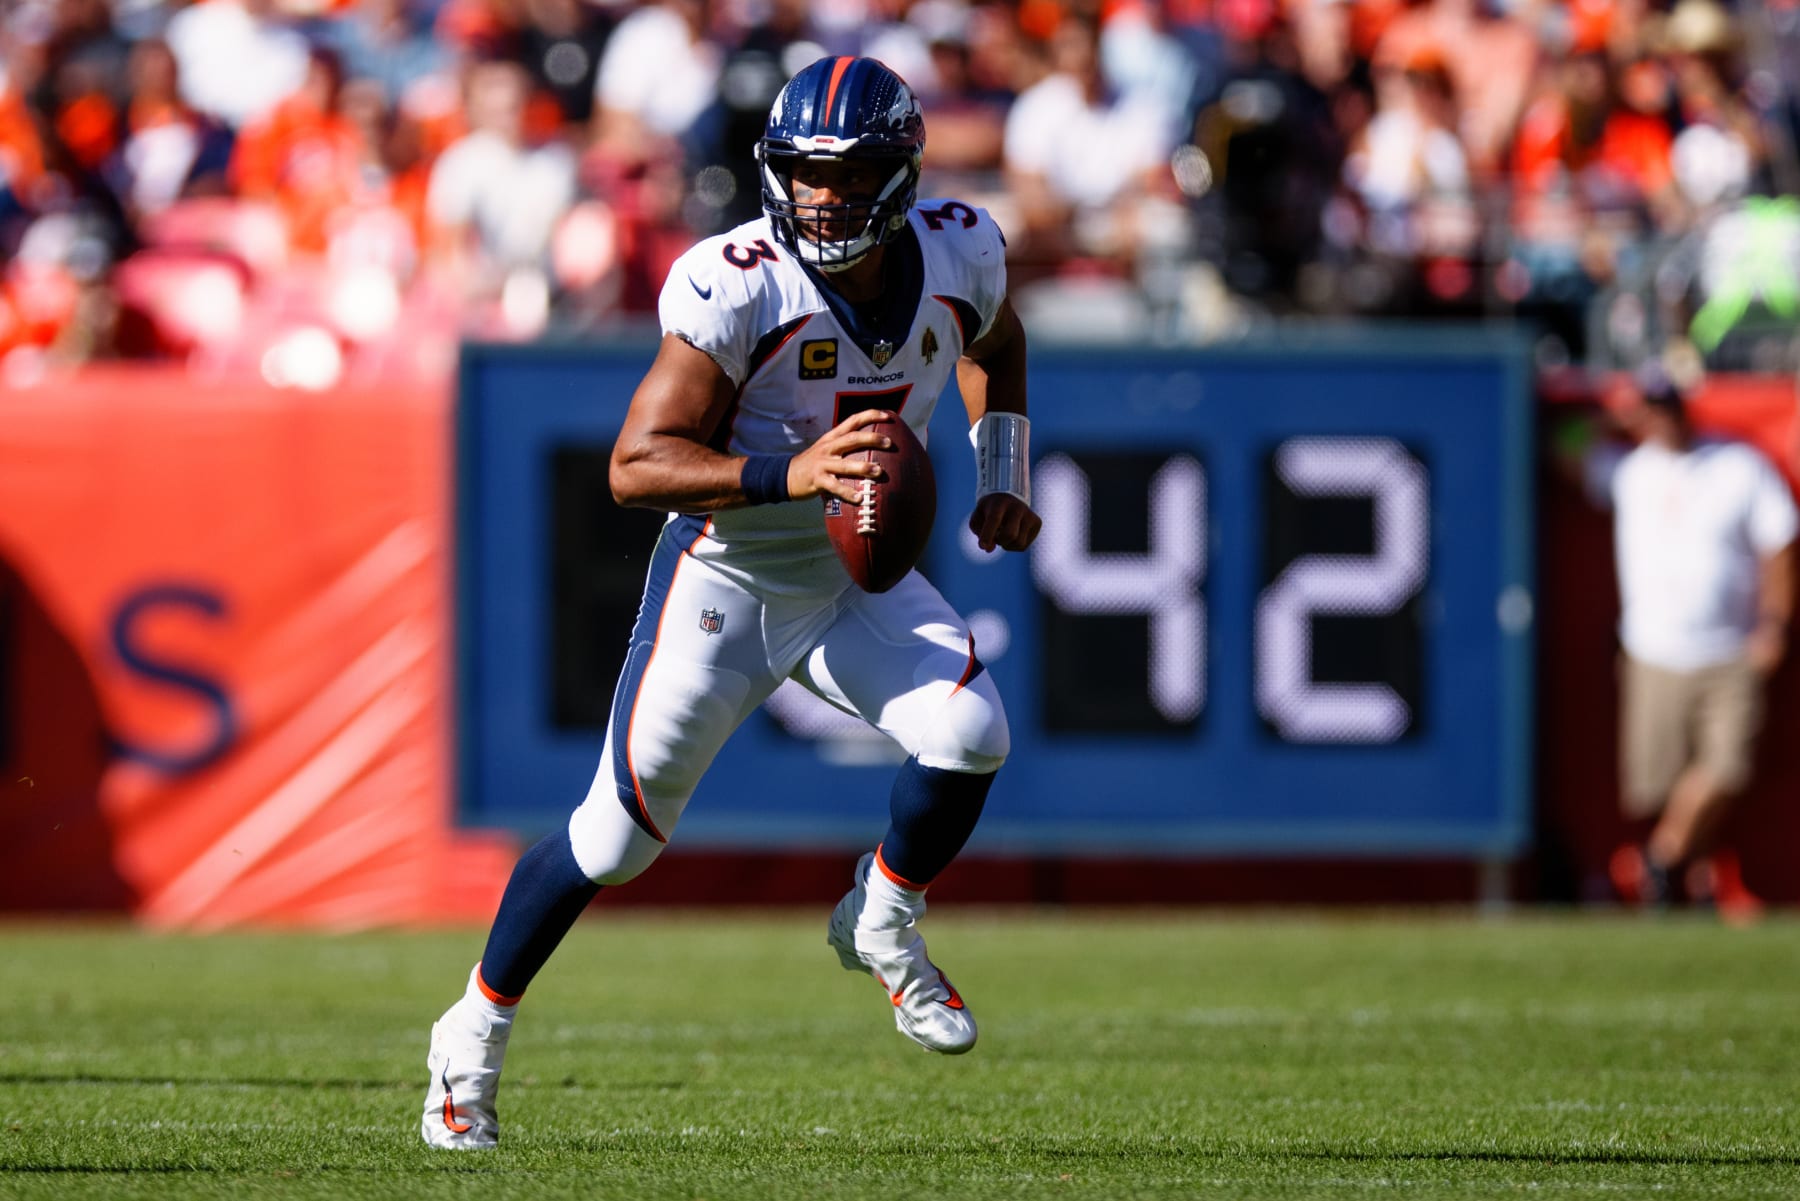 Broncos vs. Bears: Live updates and highlights from the NFL Week 4